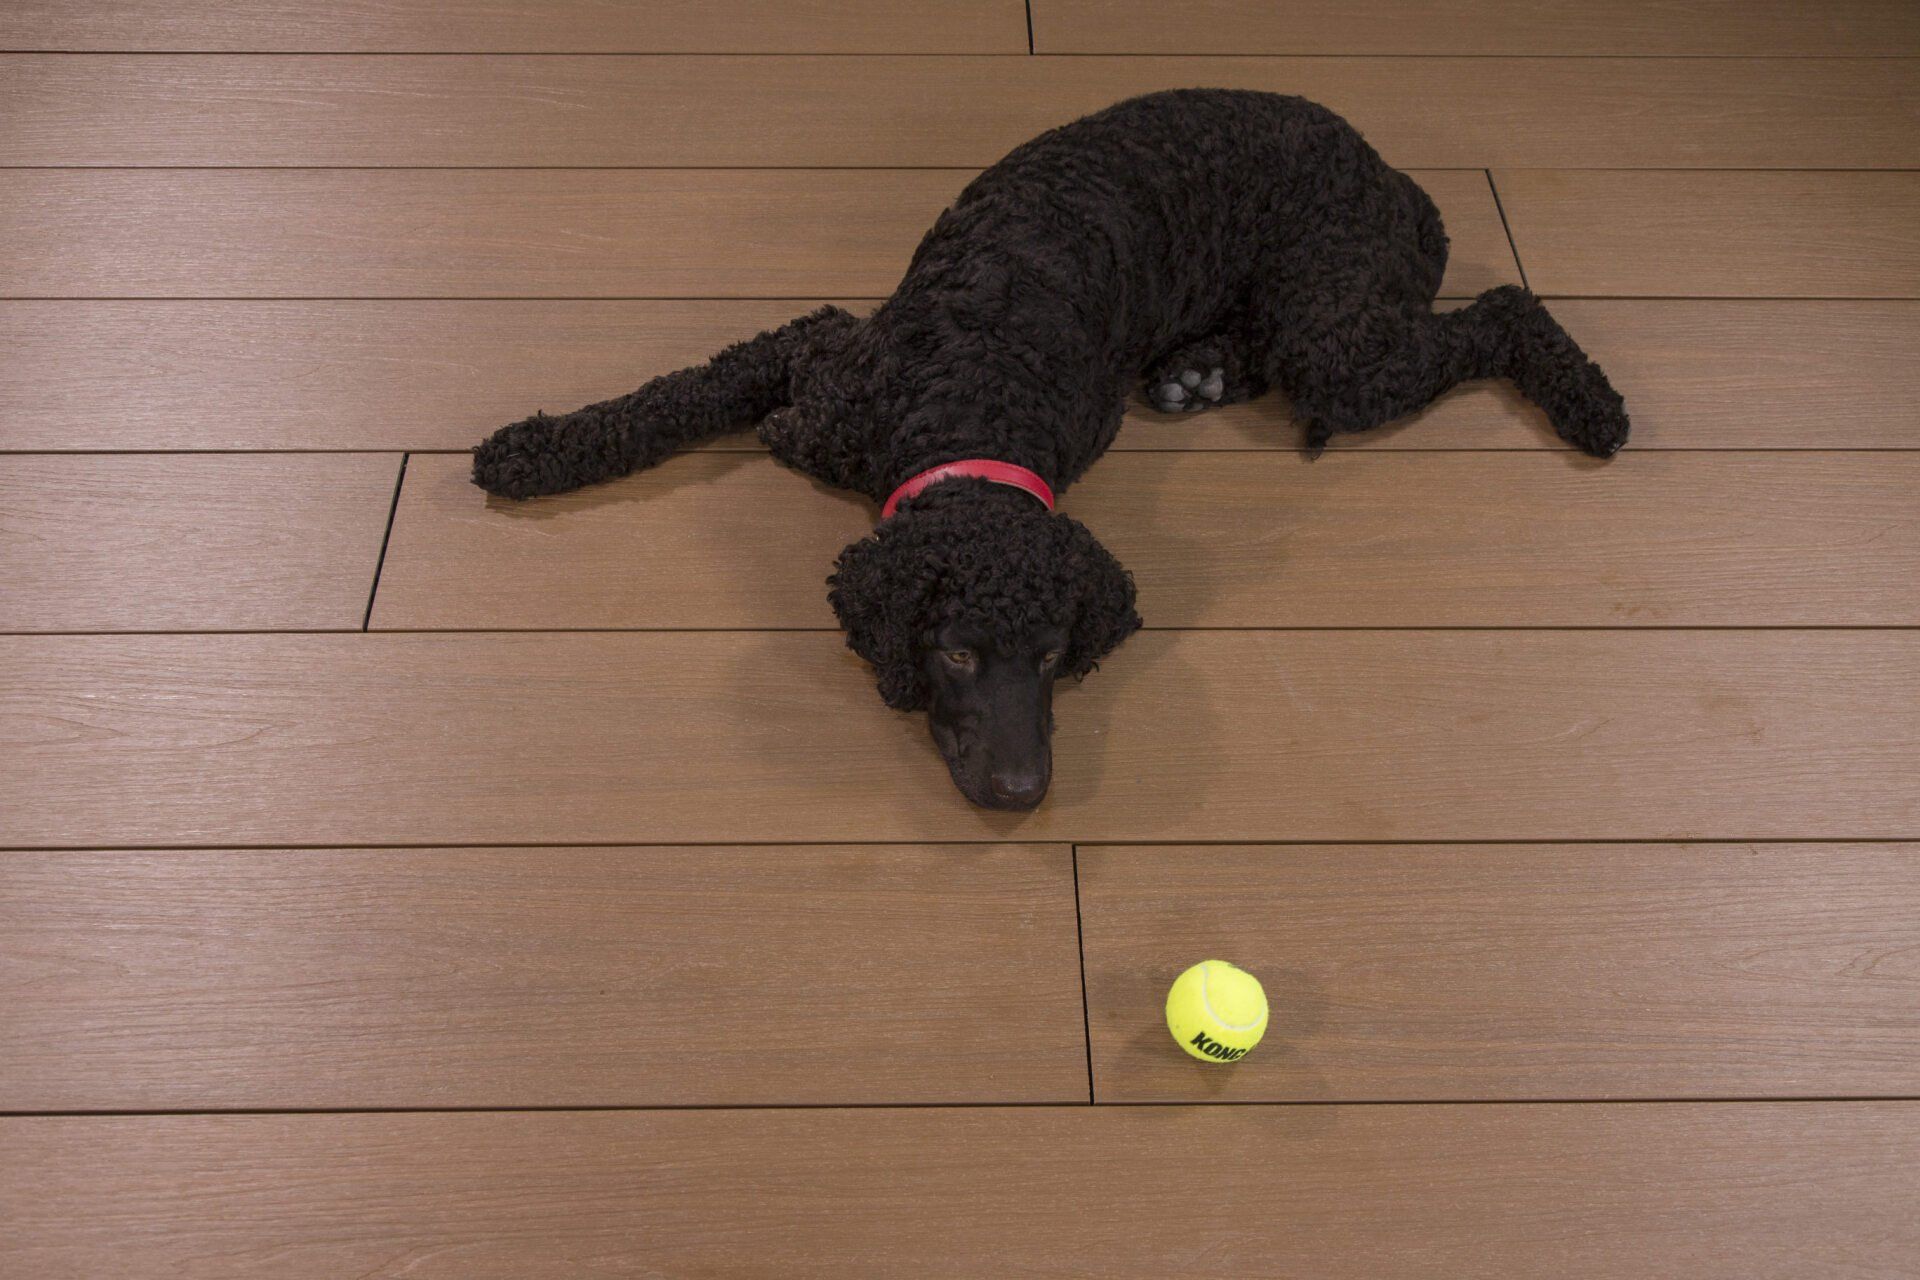 a perfectly maintained wooden flooring with a black dog laying on it